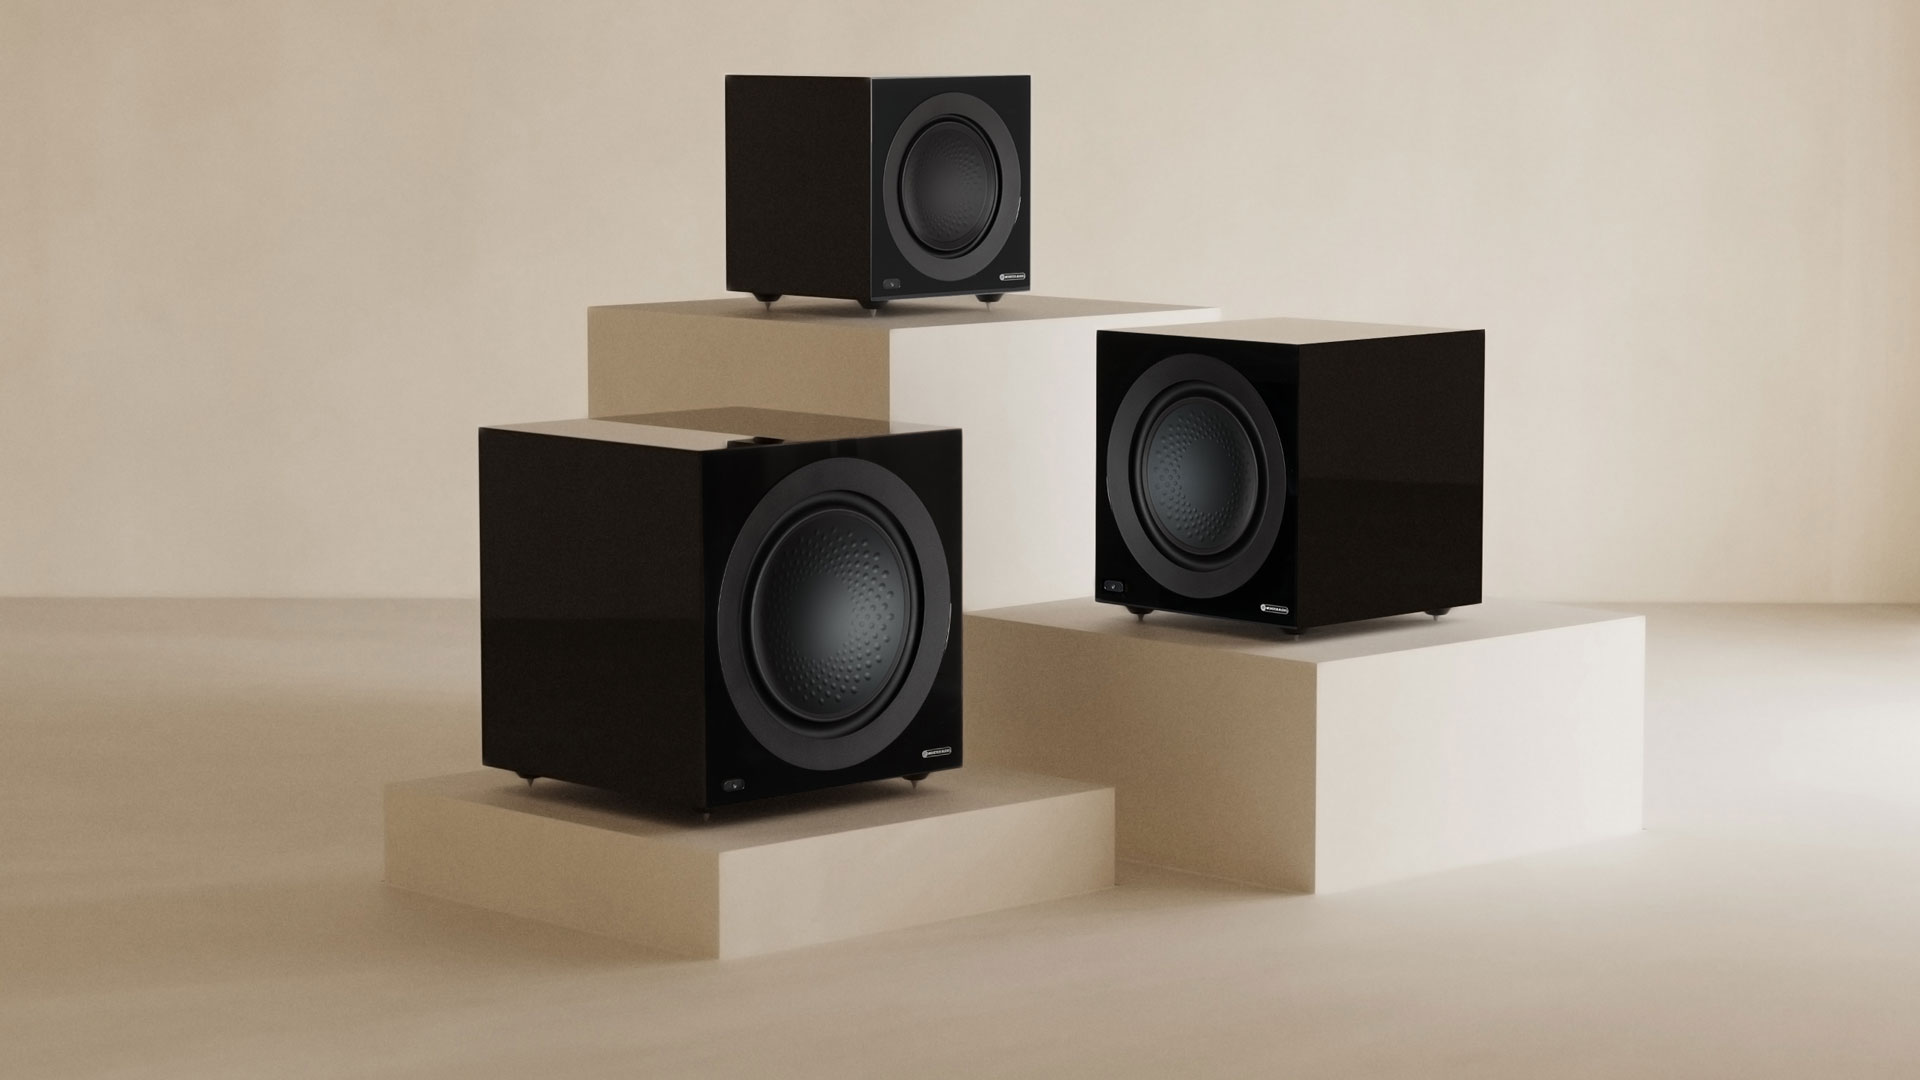 The three new "Anthra" subwoofers from Monitor Audio (Image Credit: Monitor Audio)